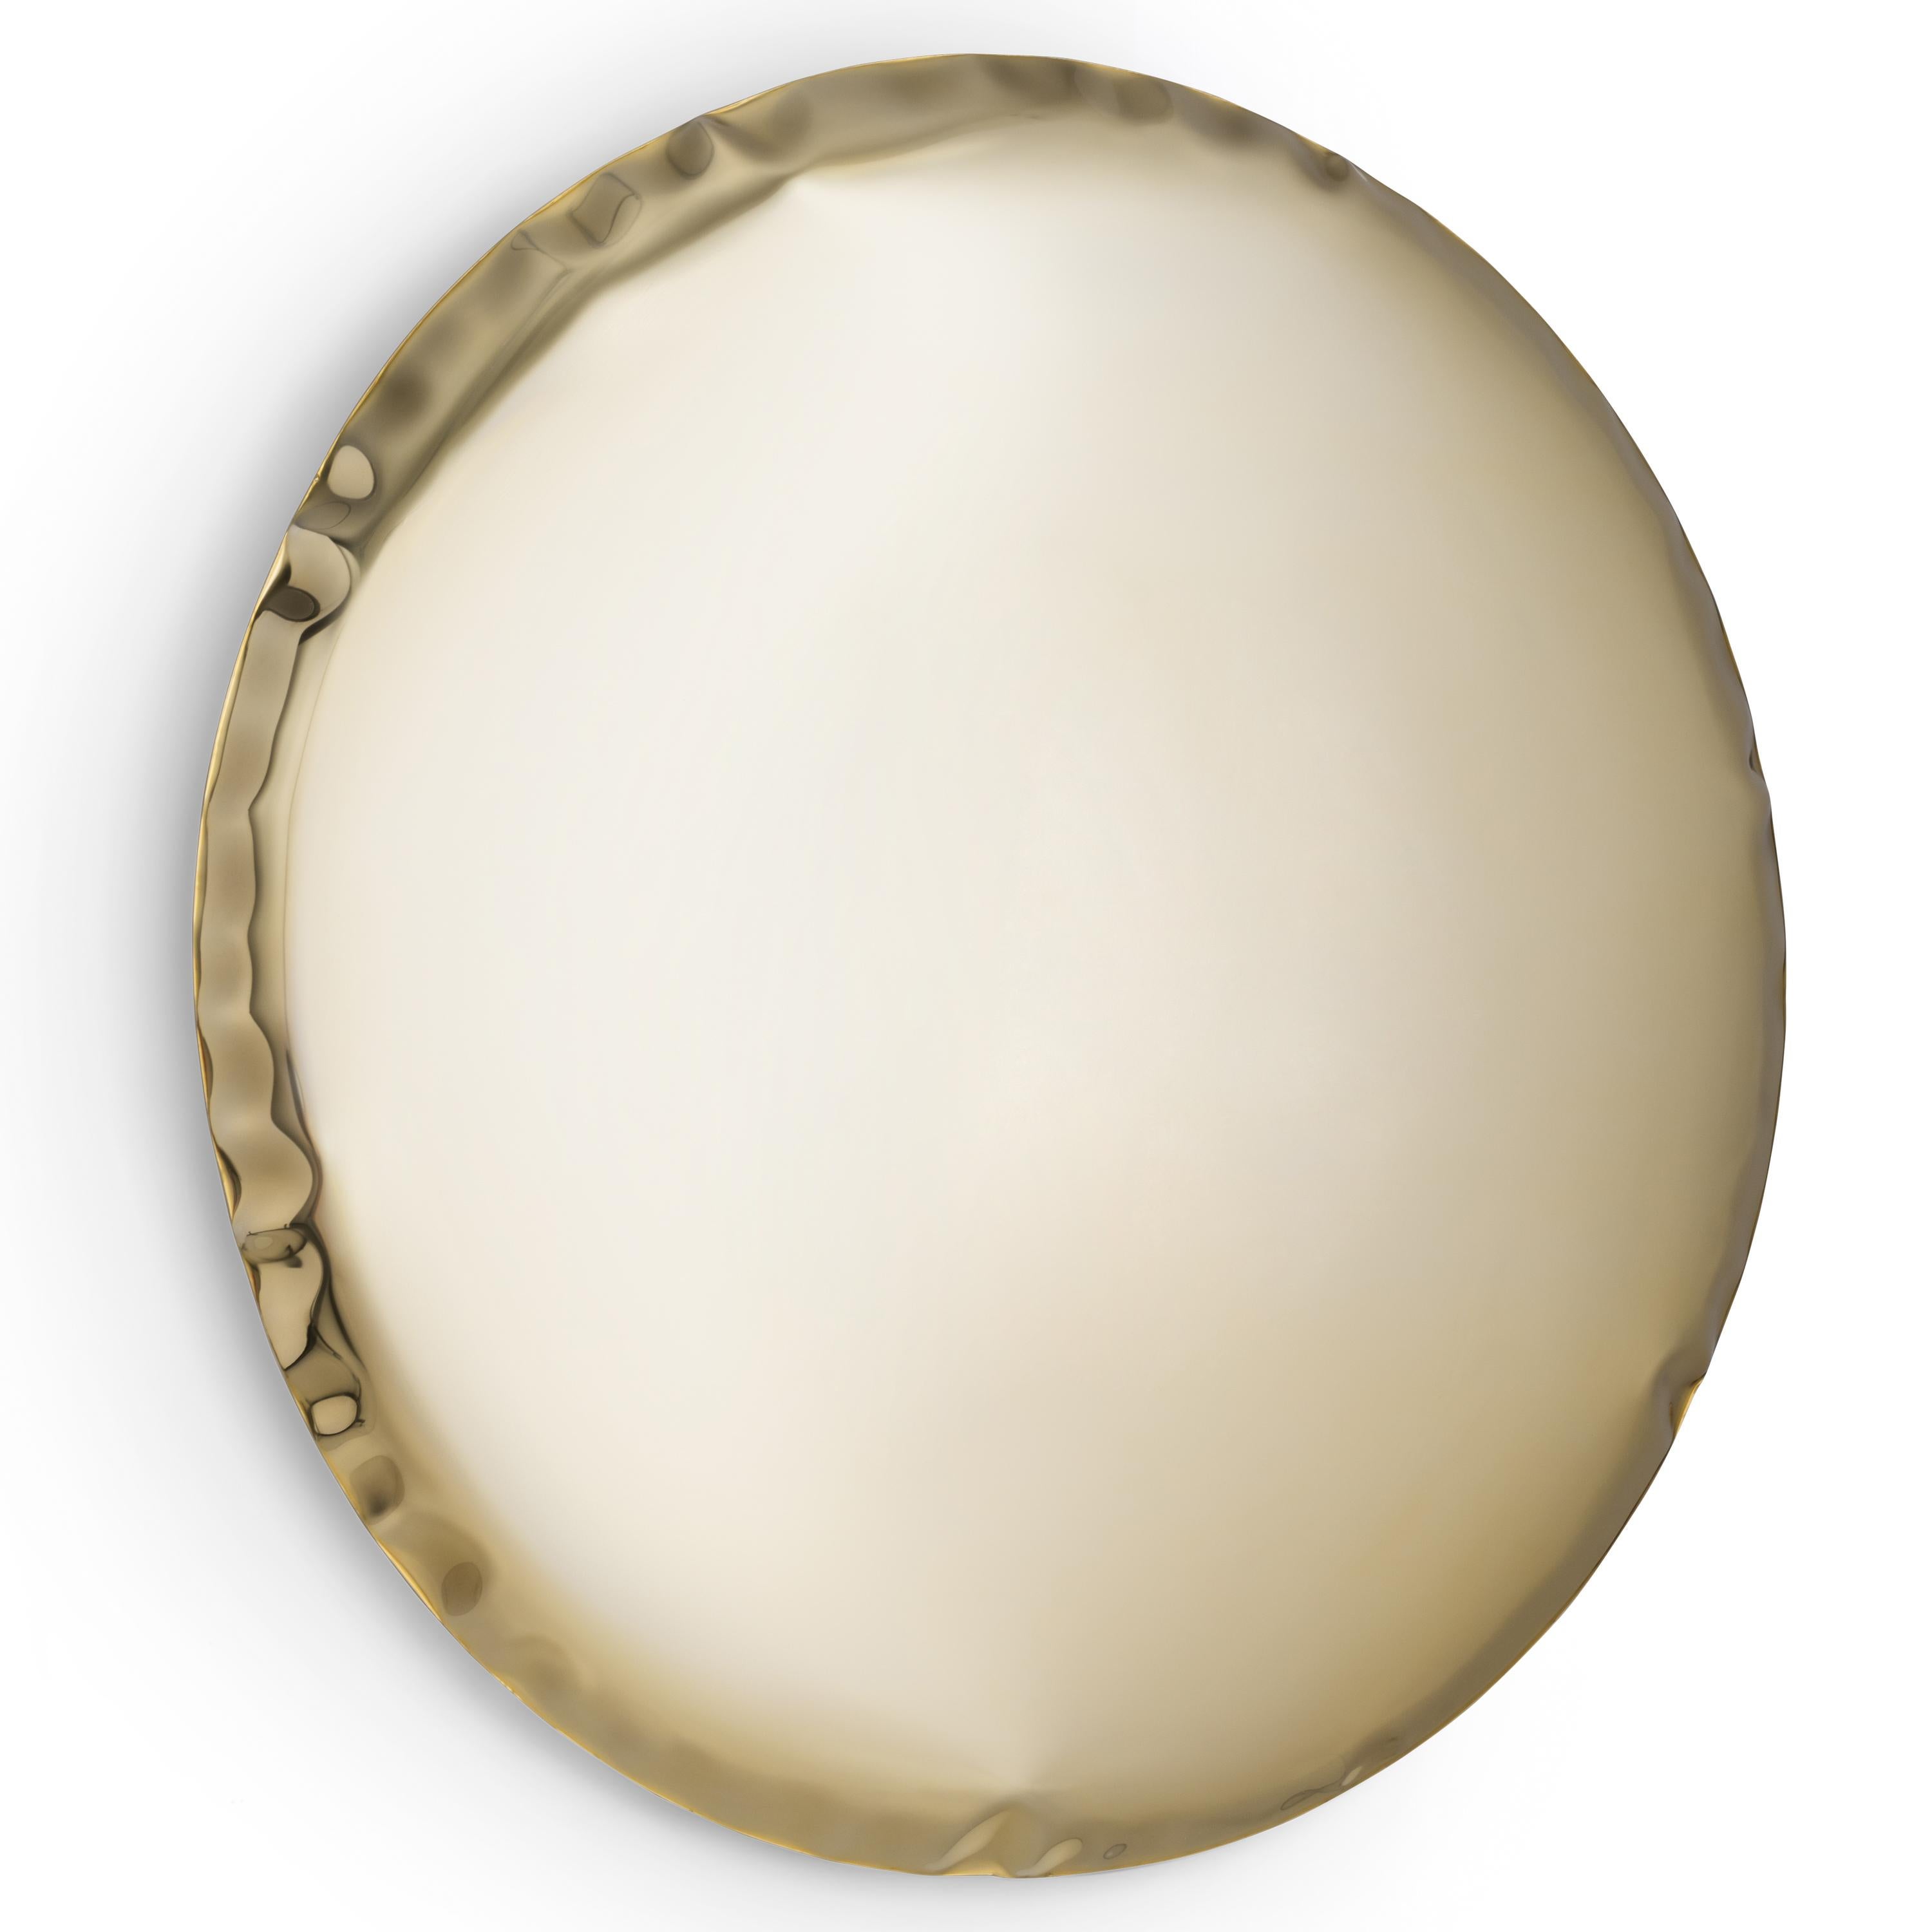 OKO 150 by Zieta
Original mirror by Zieta, delivered with certificate. 

Collection: AURUM

150cm
Polished stainless steel
Finish: Light Gold


Zieta Studio is a brand established in 2010 by Oskar Zieta – an architect and innovator, winner of many